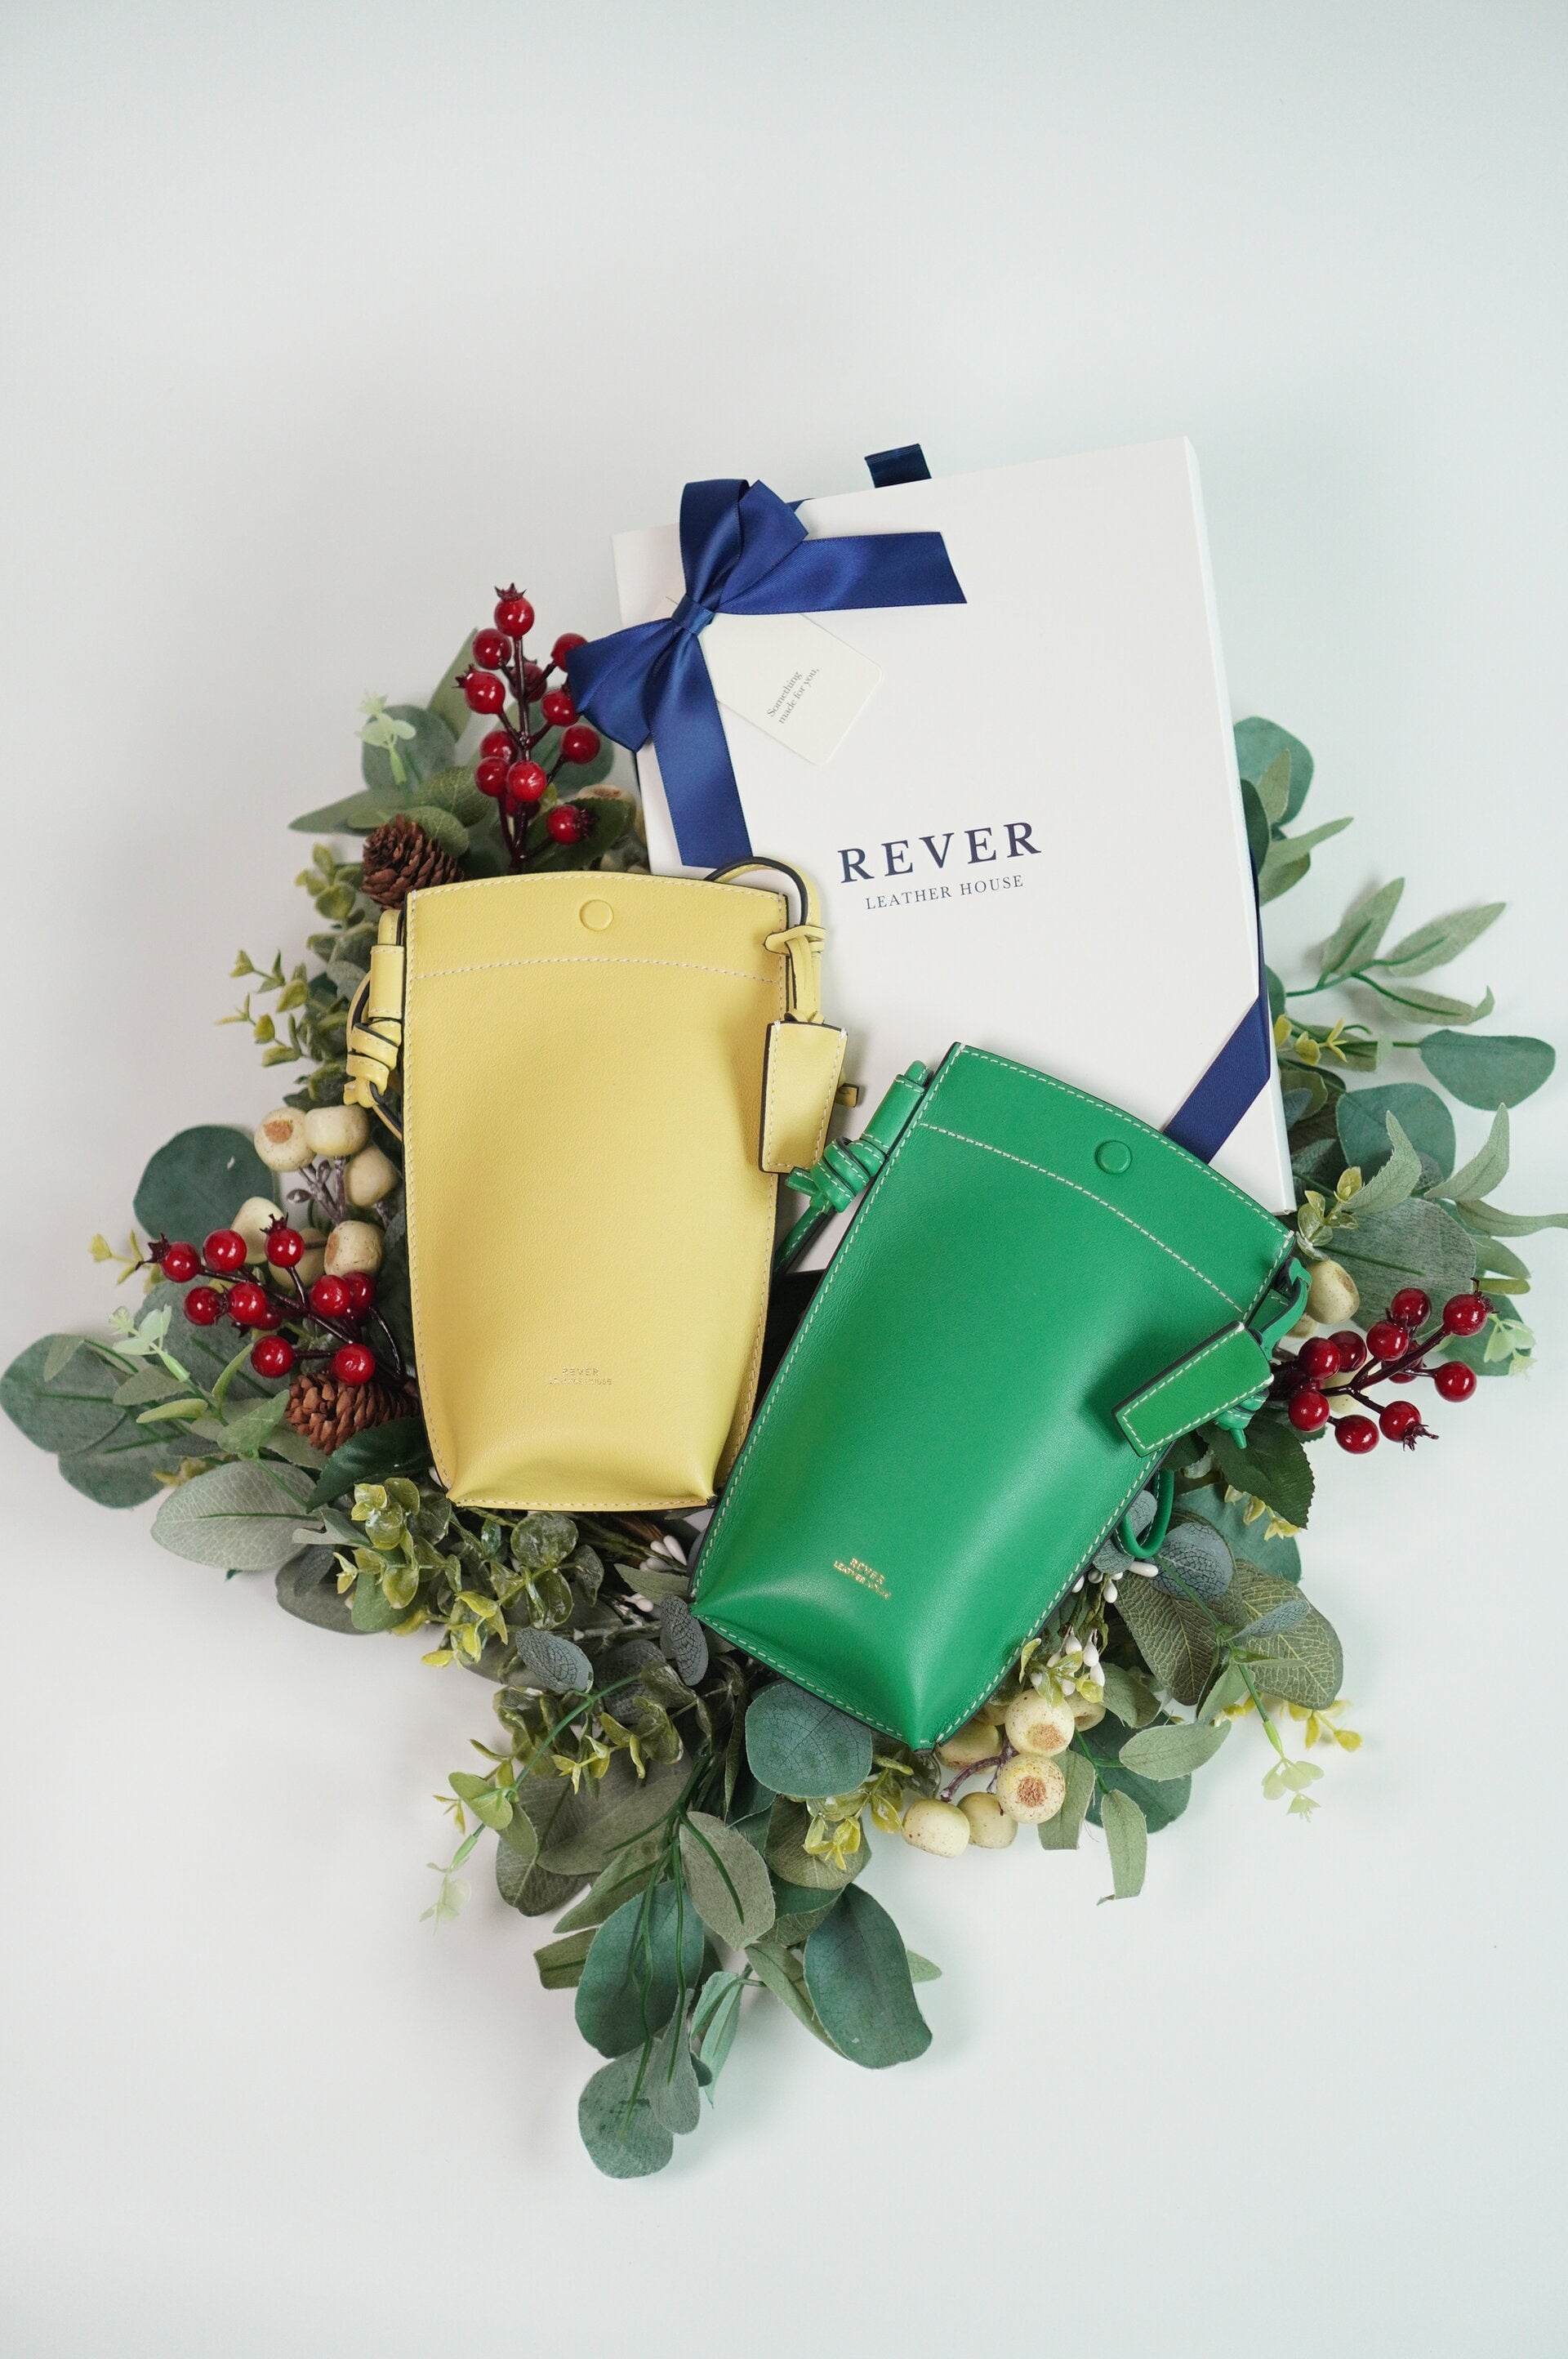 The Stylish and Functional Rubin Phone Bag: The Perfect Gift for On-the-Go